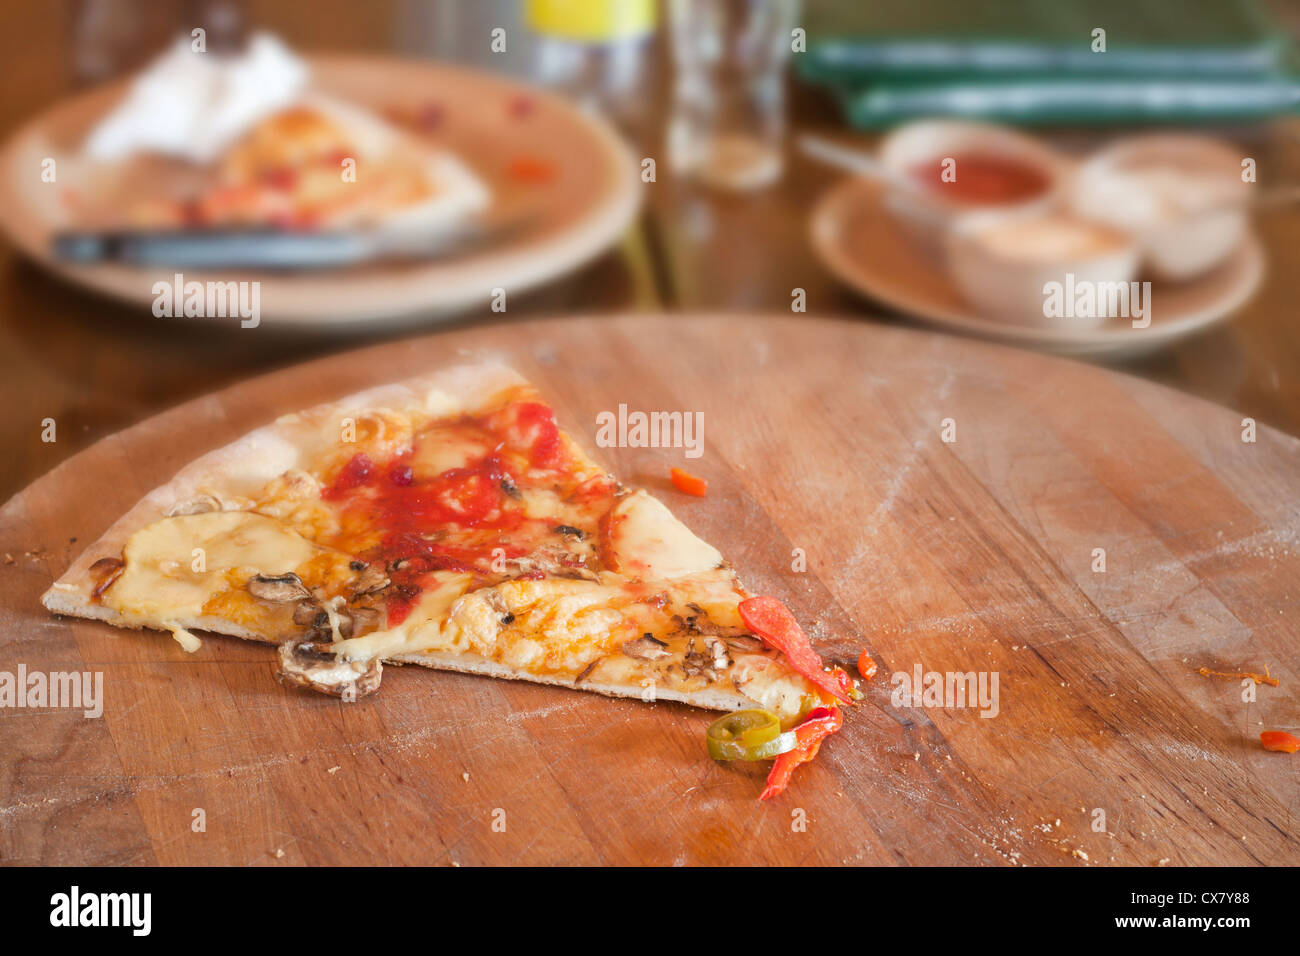 Uneaten piece of pizza in restaurant on the table Stock Photo